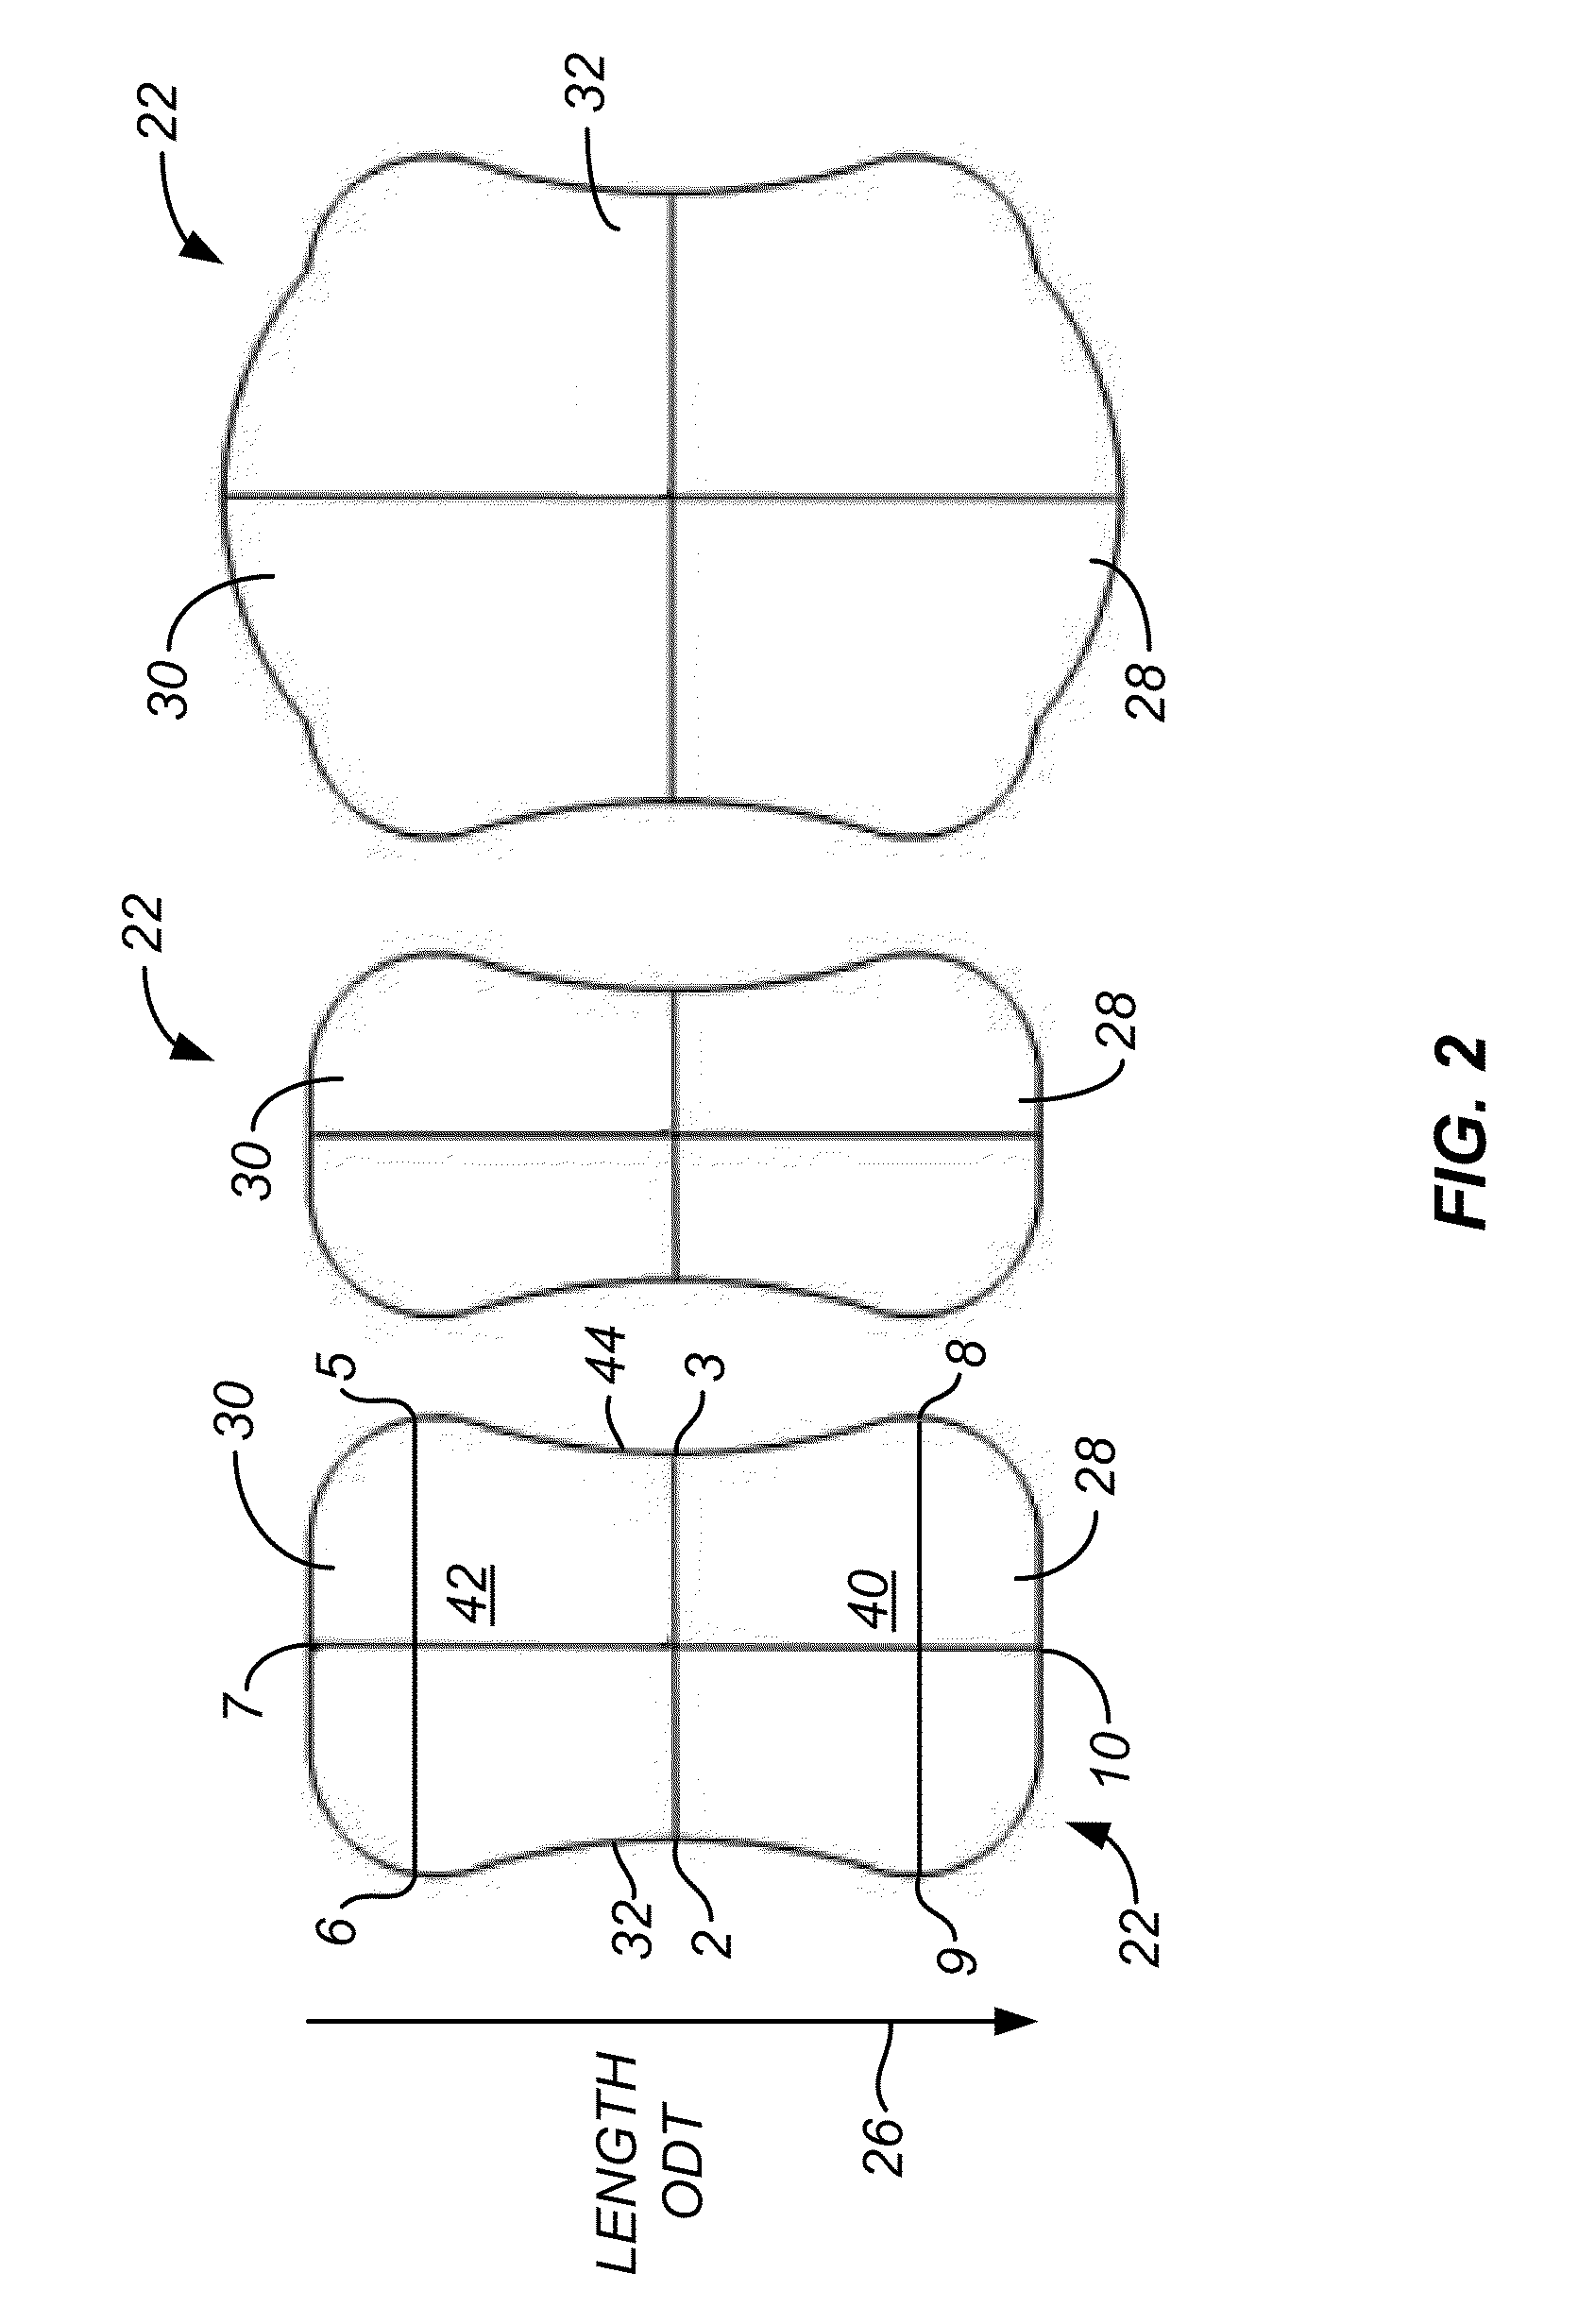 Personal Transportation Device and Method